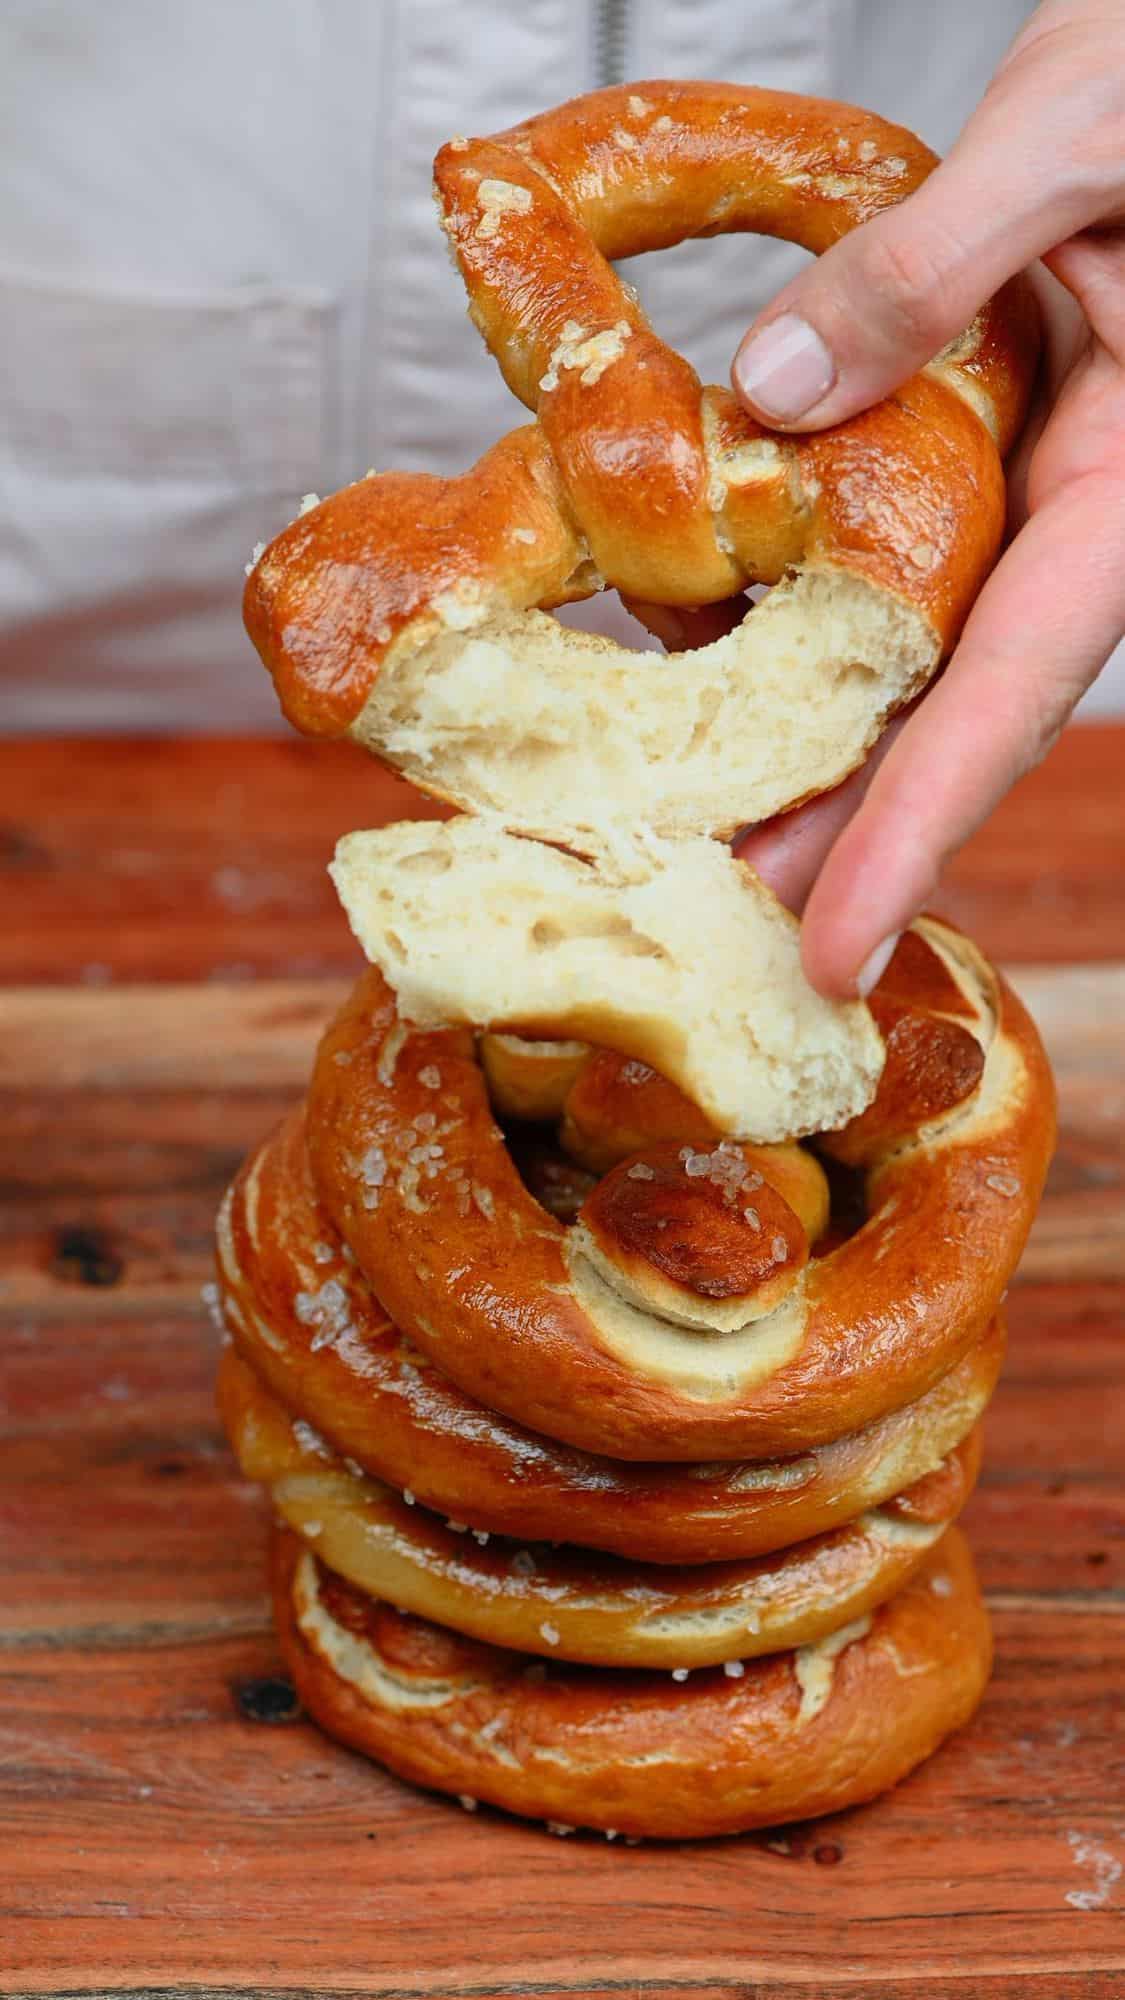 A hand holding pretzel with a piece cut off and a stack of four pretzels underneath